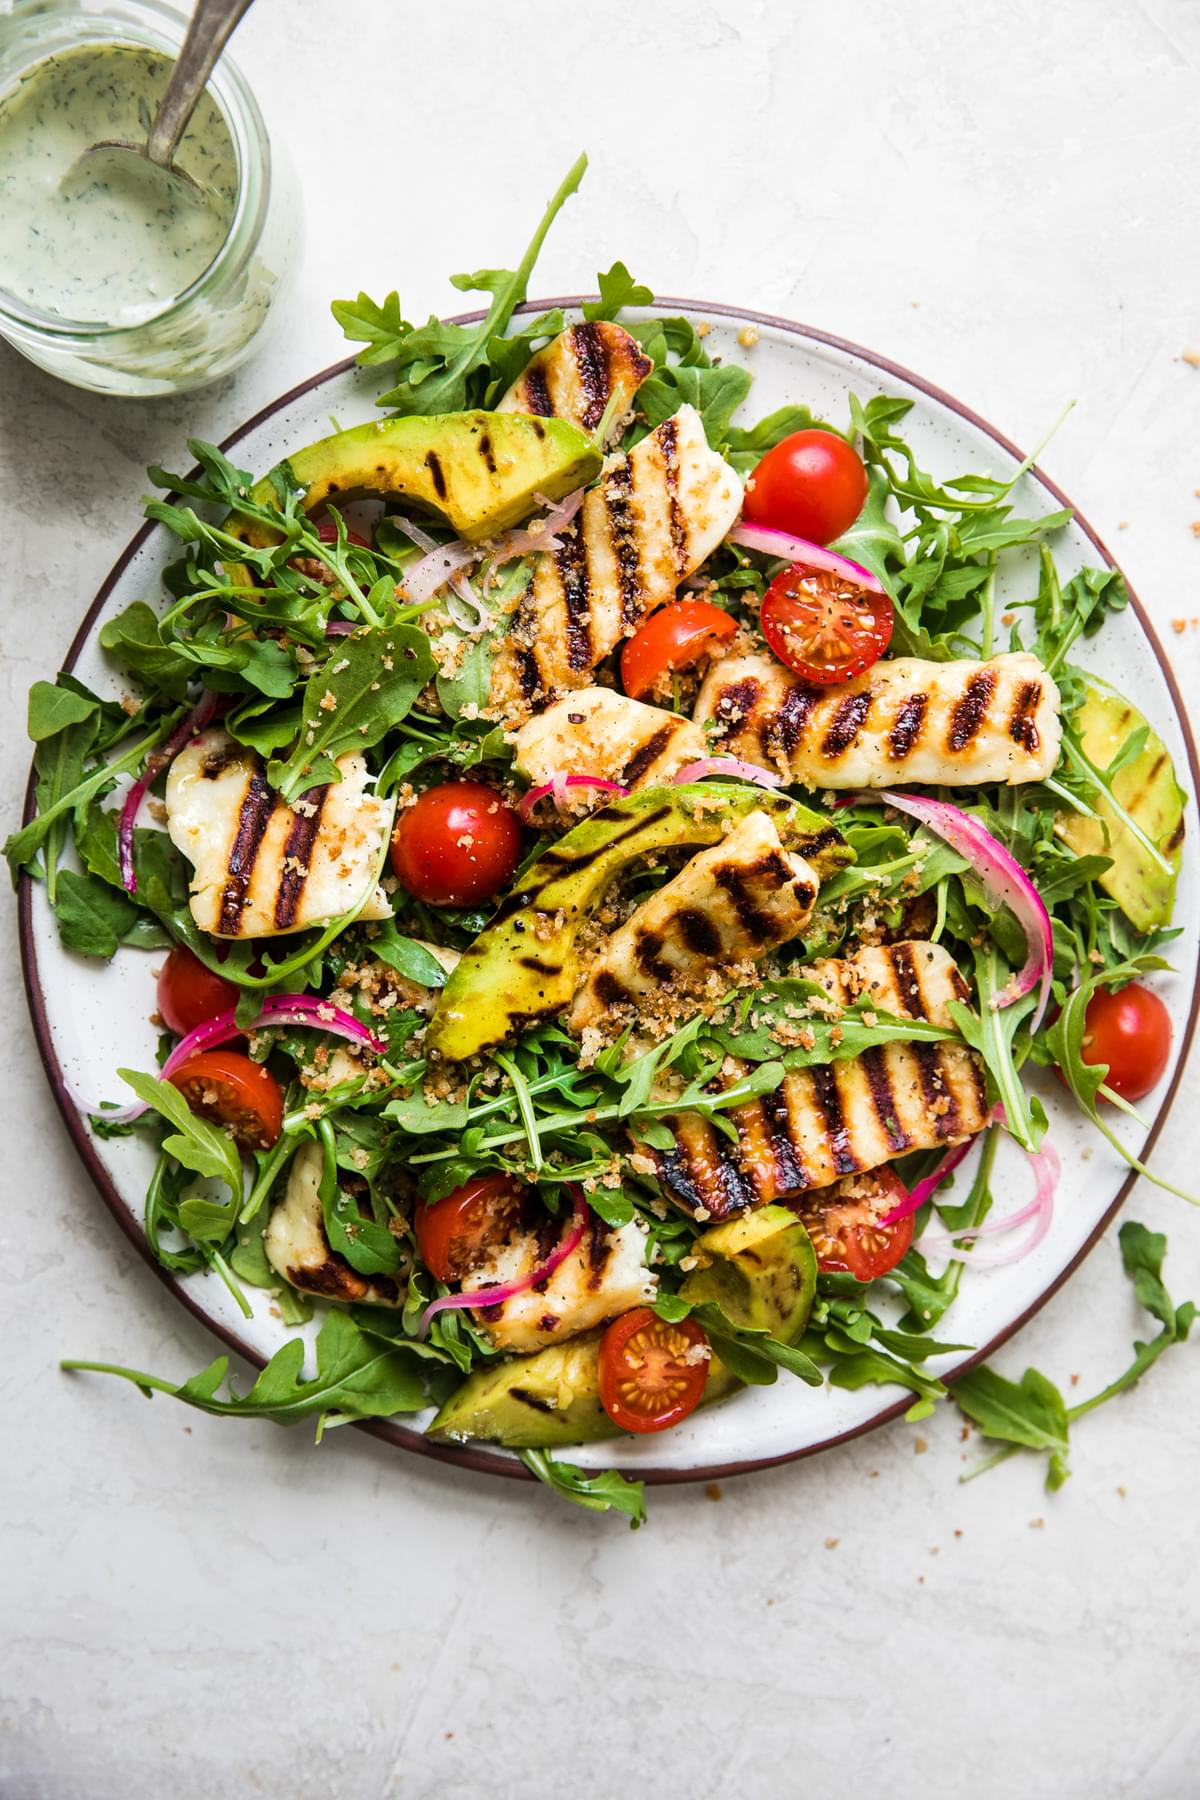 Grilled Halloumi Salad with arugula, pickled onions, avocado, tomatoes and creamy basil dressing